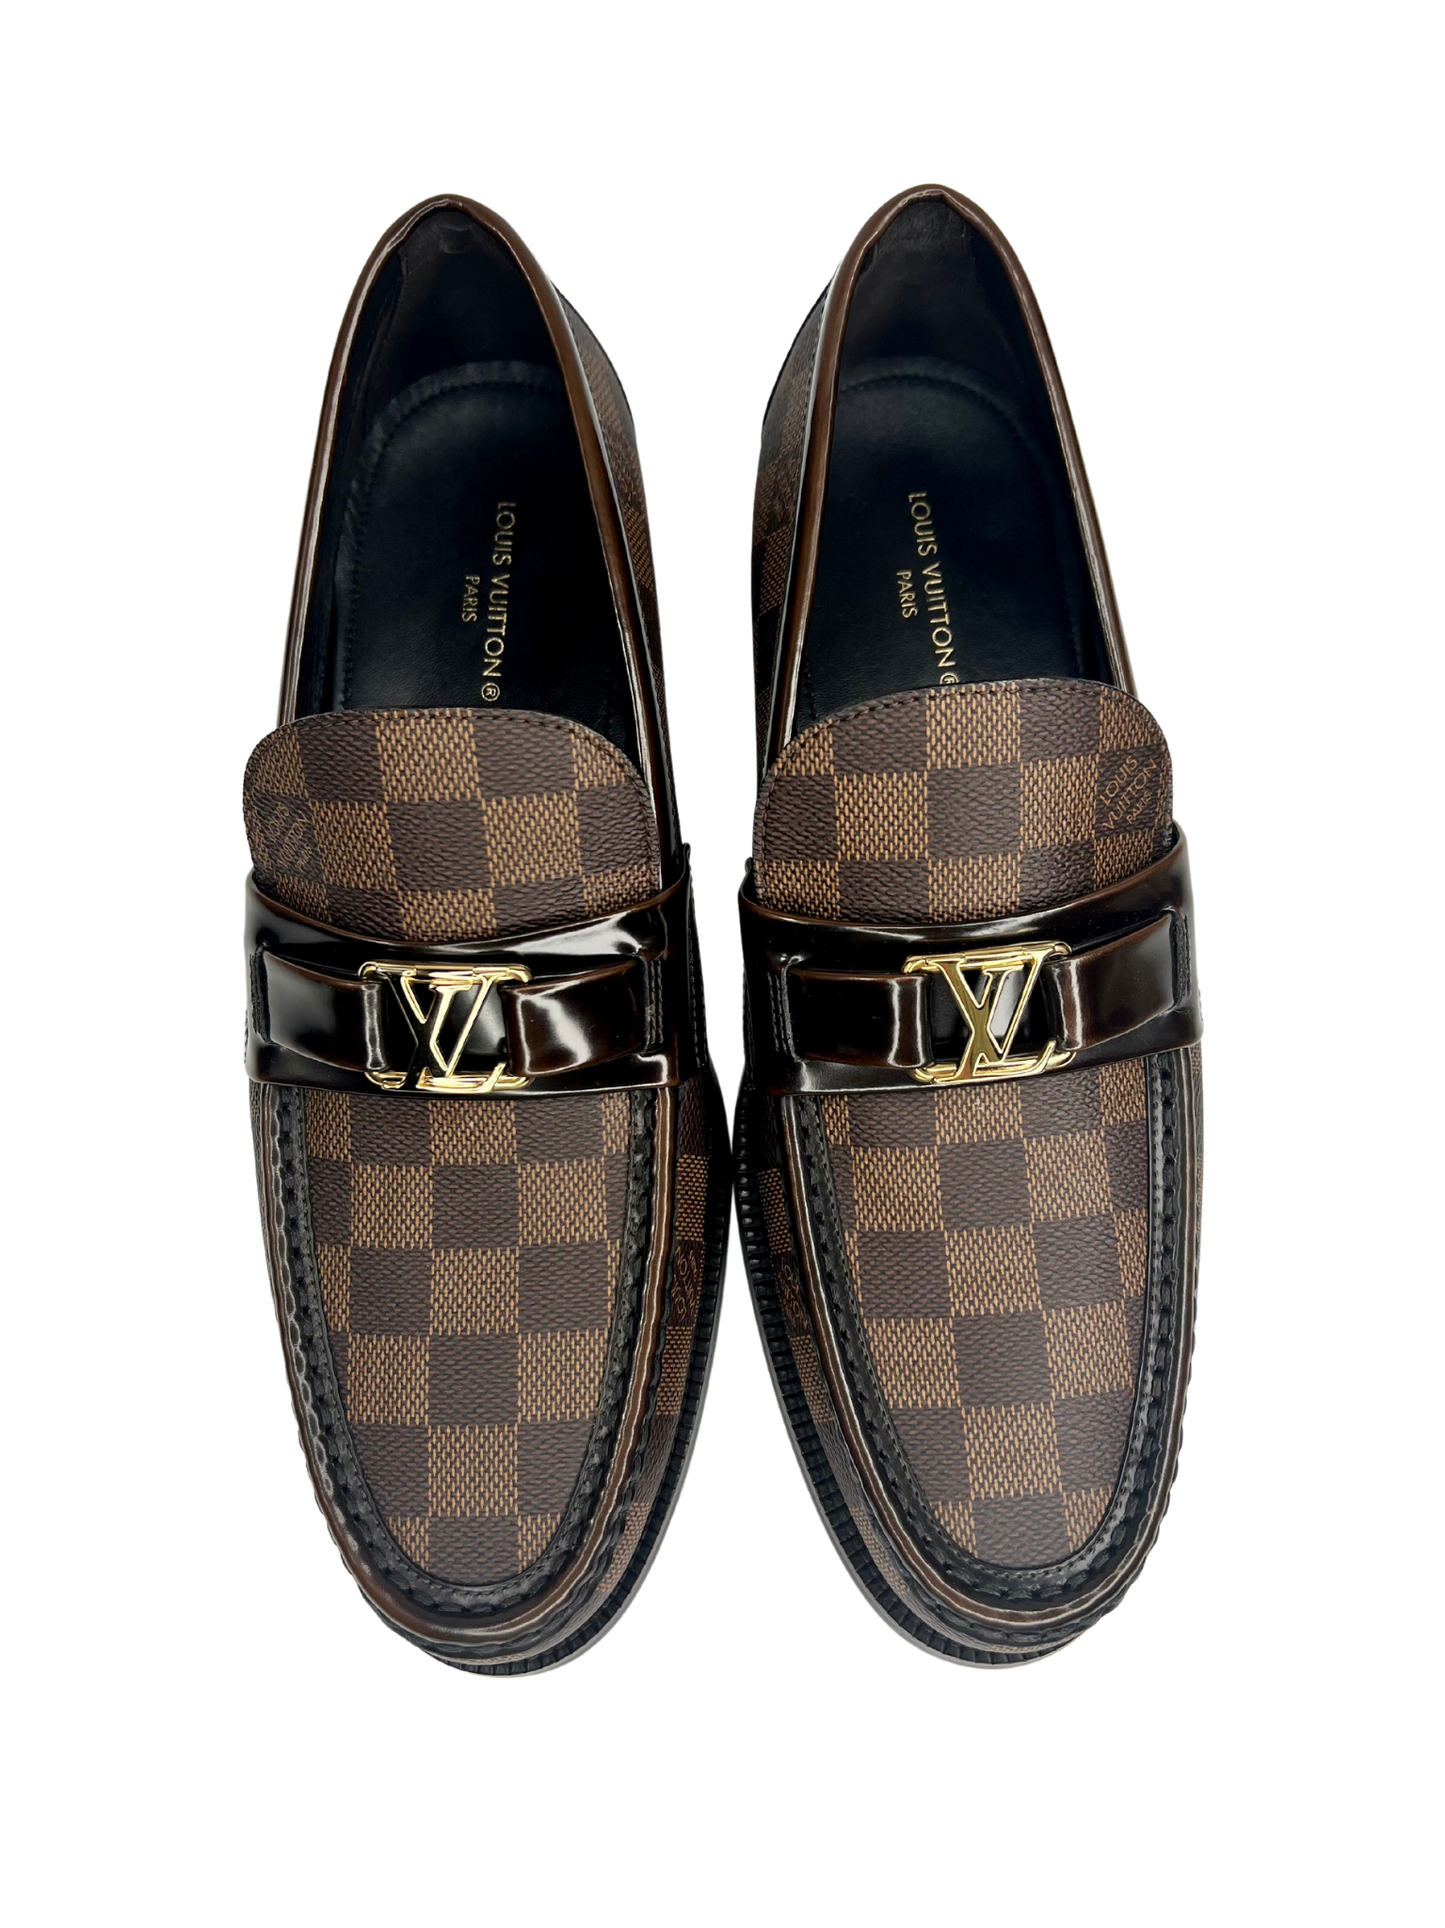 LOUIS VUITTON® Major Loafer  Louis vuitton loafers, Loafers